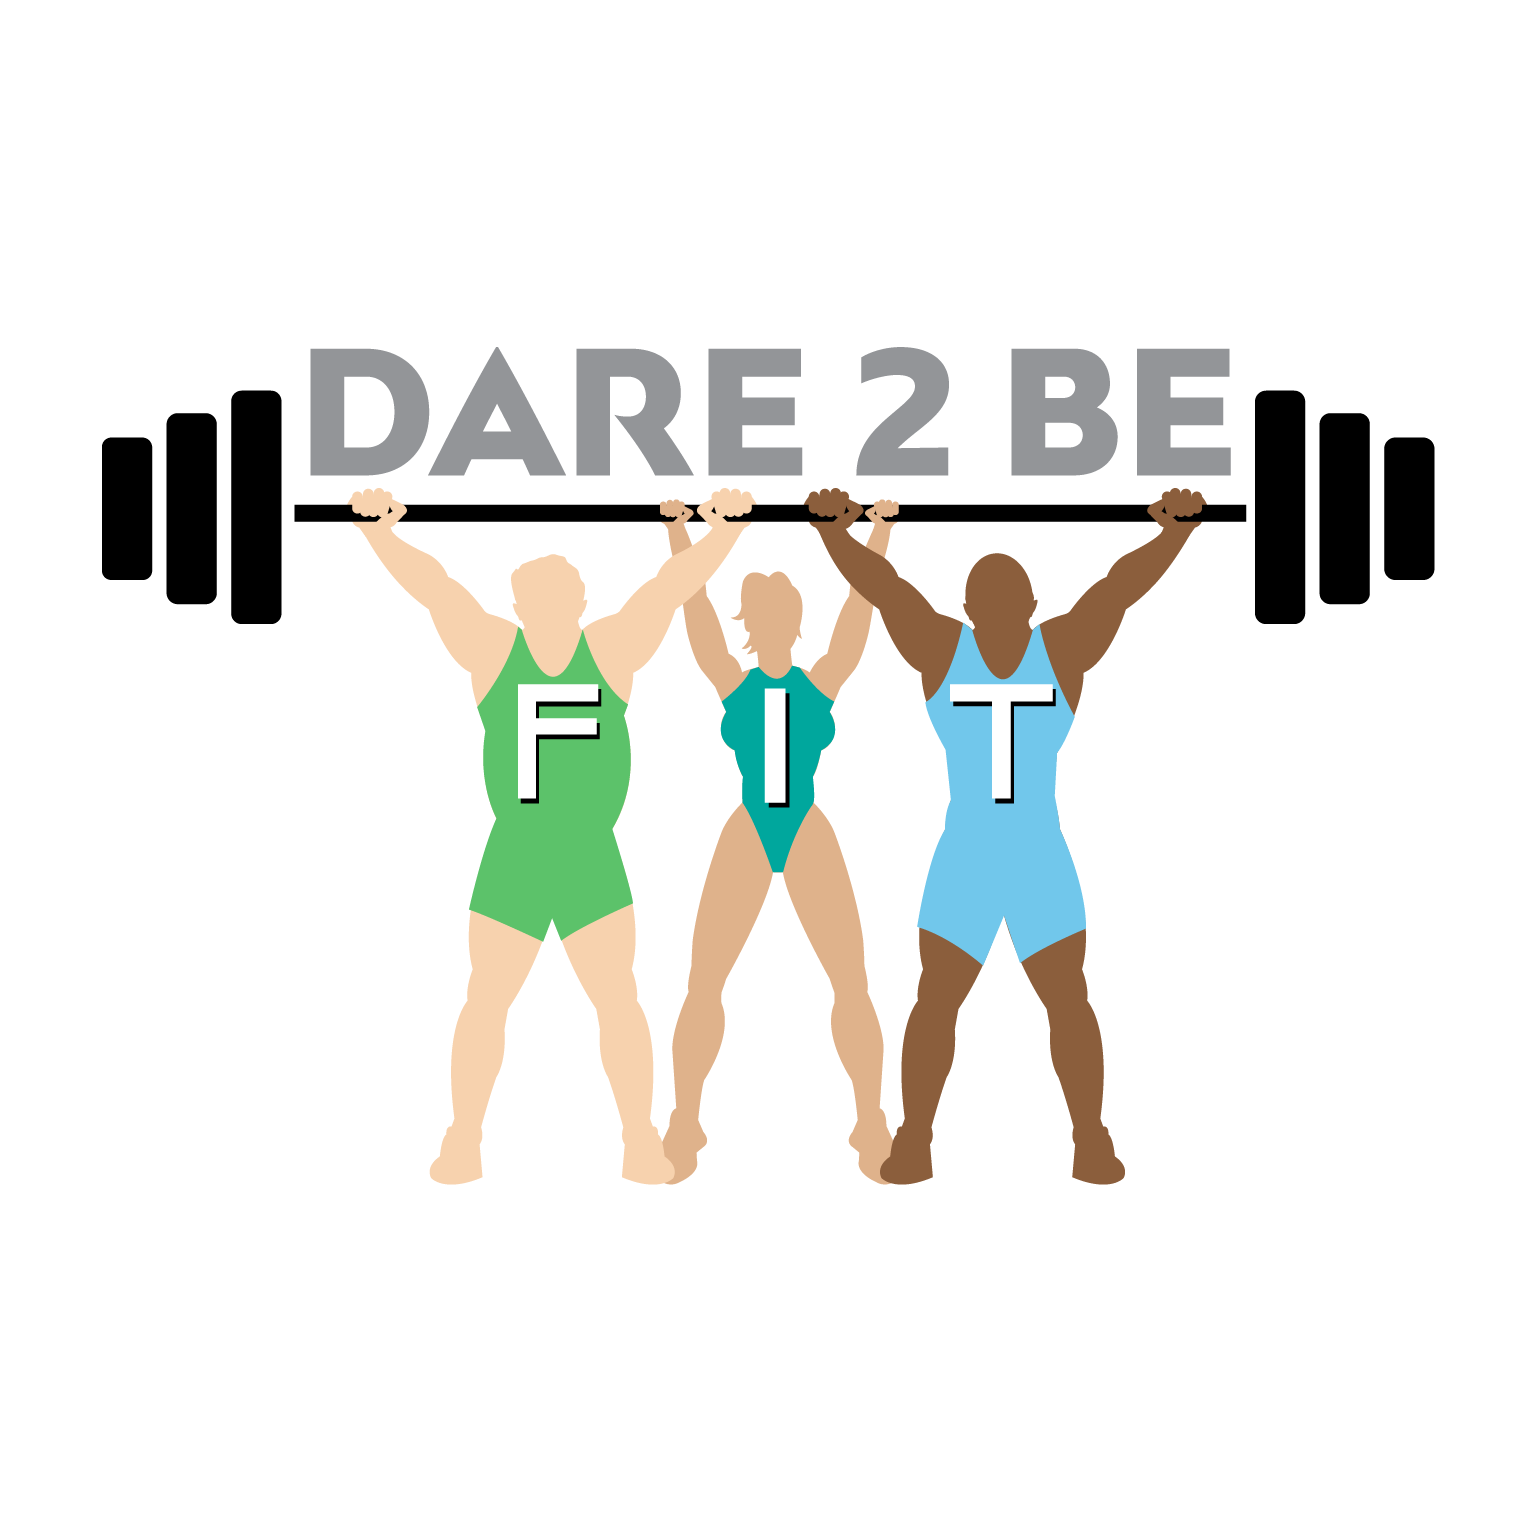 Dare 2 Be Fit logo